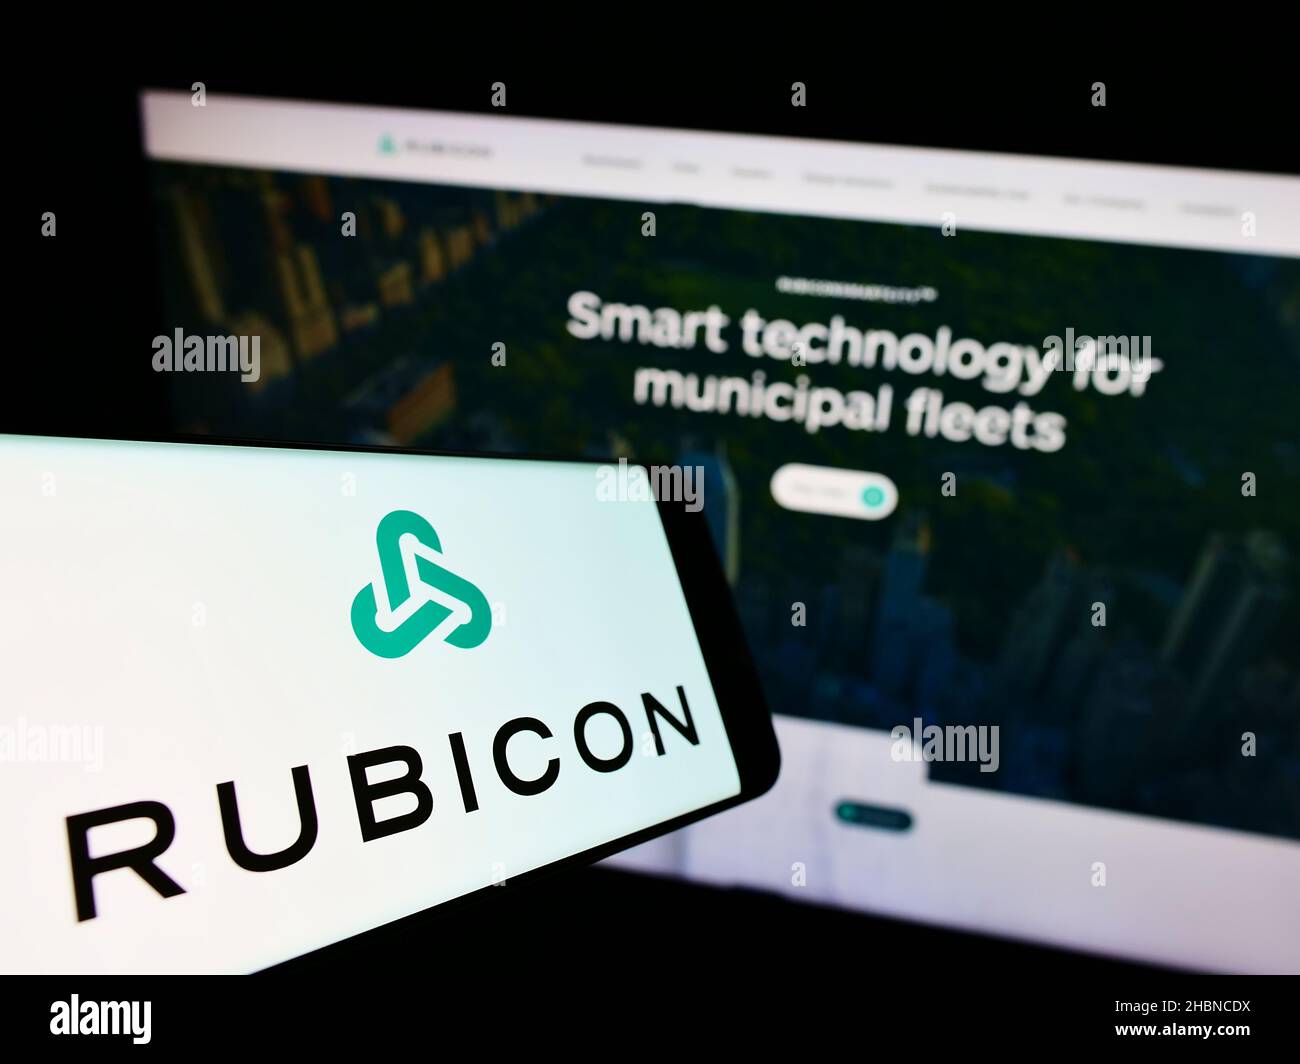 Smartphone with logo of US software company Rubicon Technologies LLC on screen in front of business website. Focus on center of phone display. Stock Photo